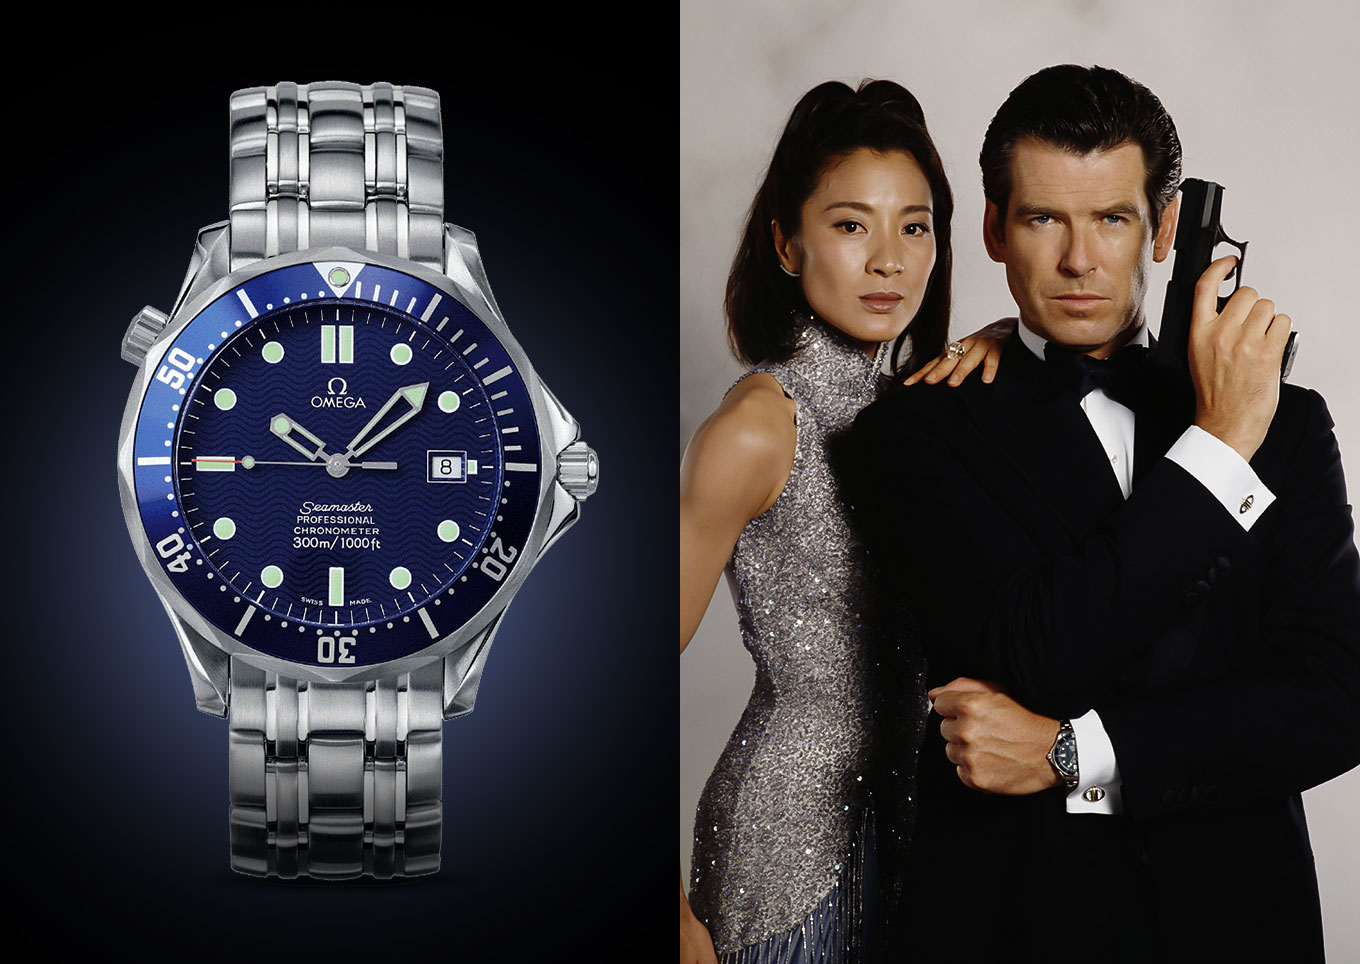 James Bond in Omega watches